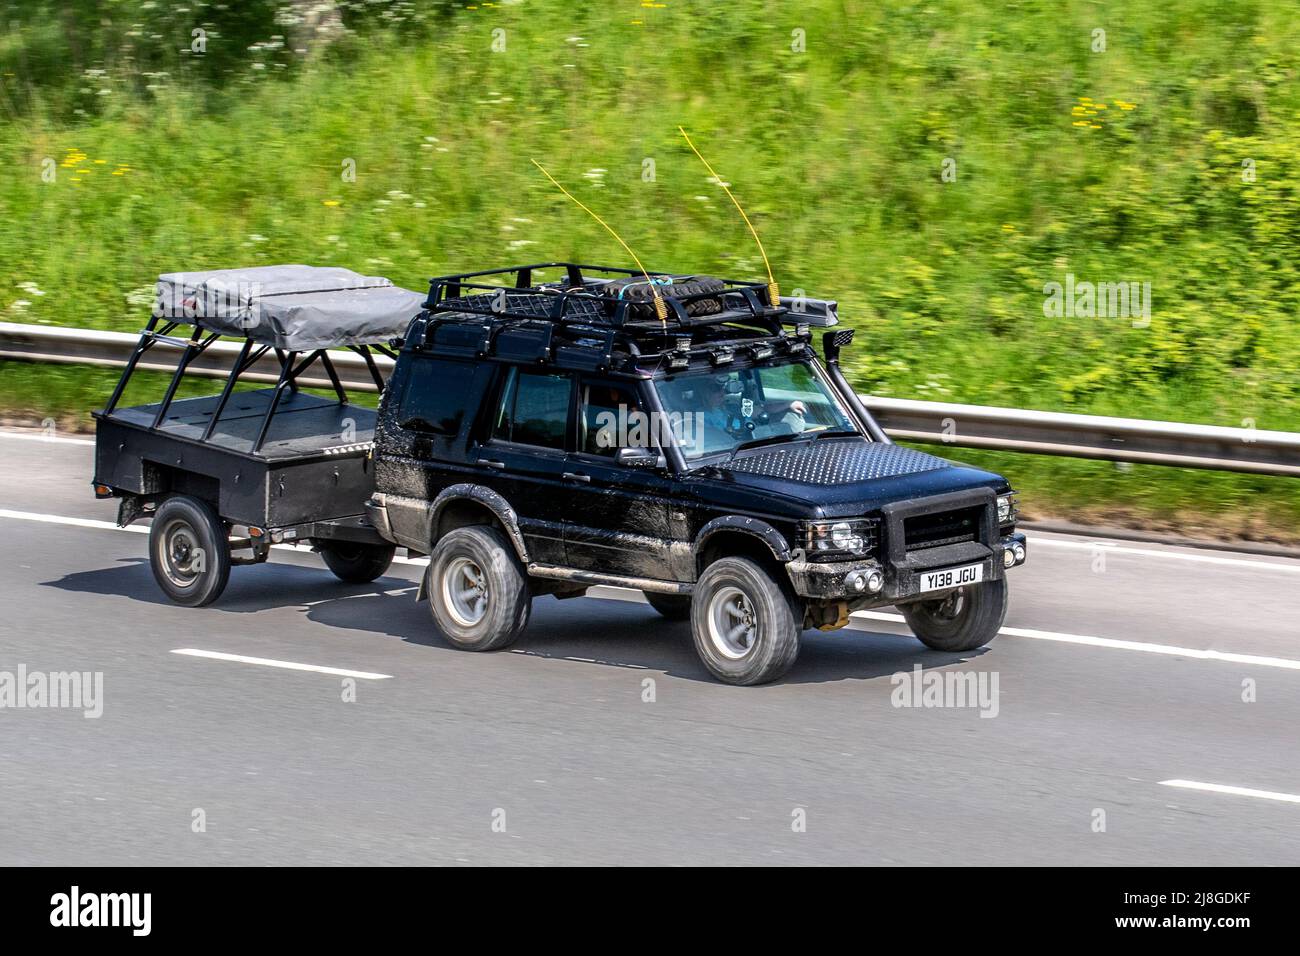 Dirty, Mud spattered 2001 black custom Expedition Land Rover Discovery 2495cc towing camping trailer; driving on the M61 Motorway, Manchester, UK Stock Photo